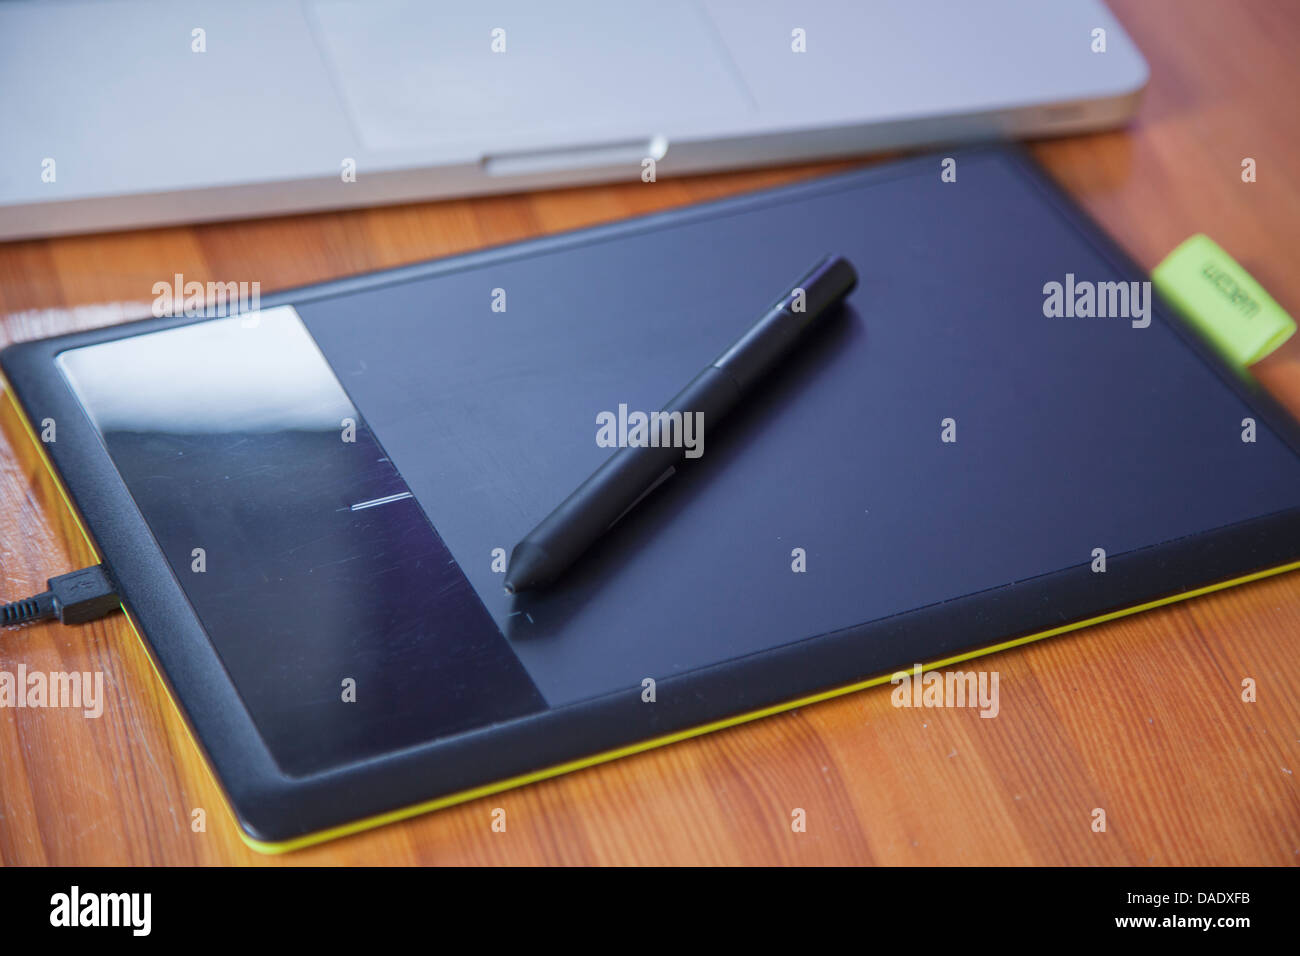 graphic tablet Stock Photo